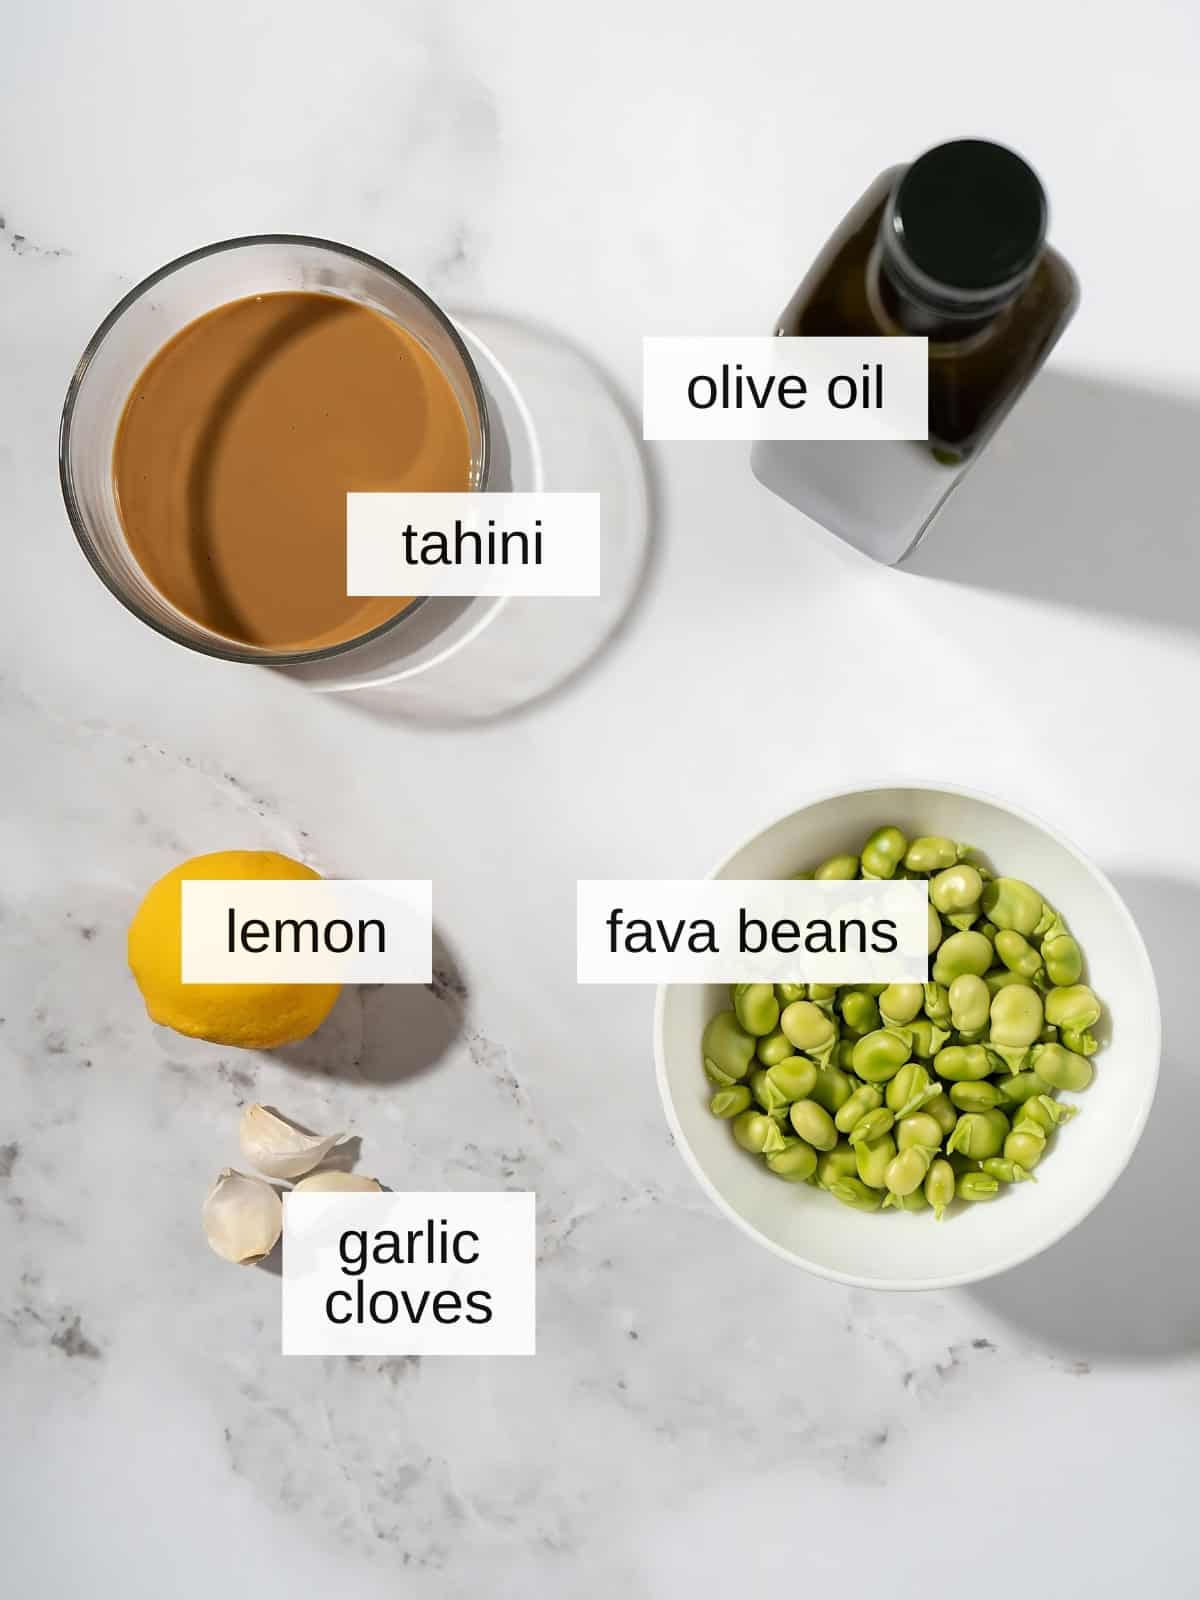 Fava bean hummus recipe ingredients with olive oil, tahini, fava beans, lemon, and garlic cloves.